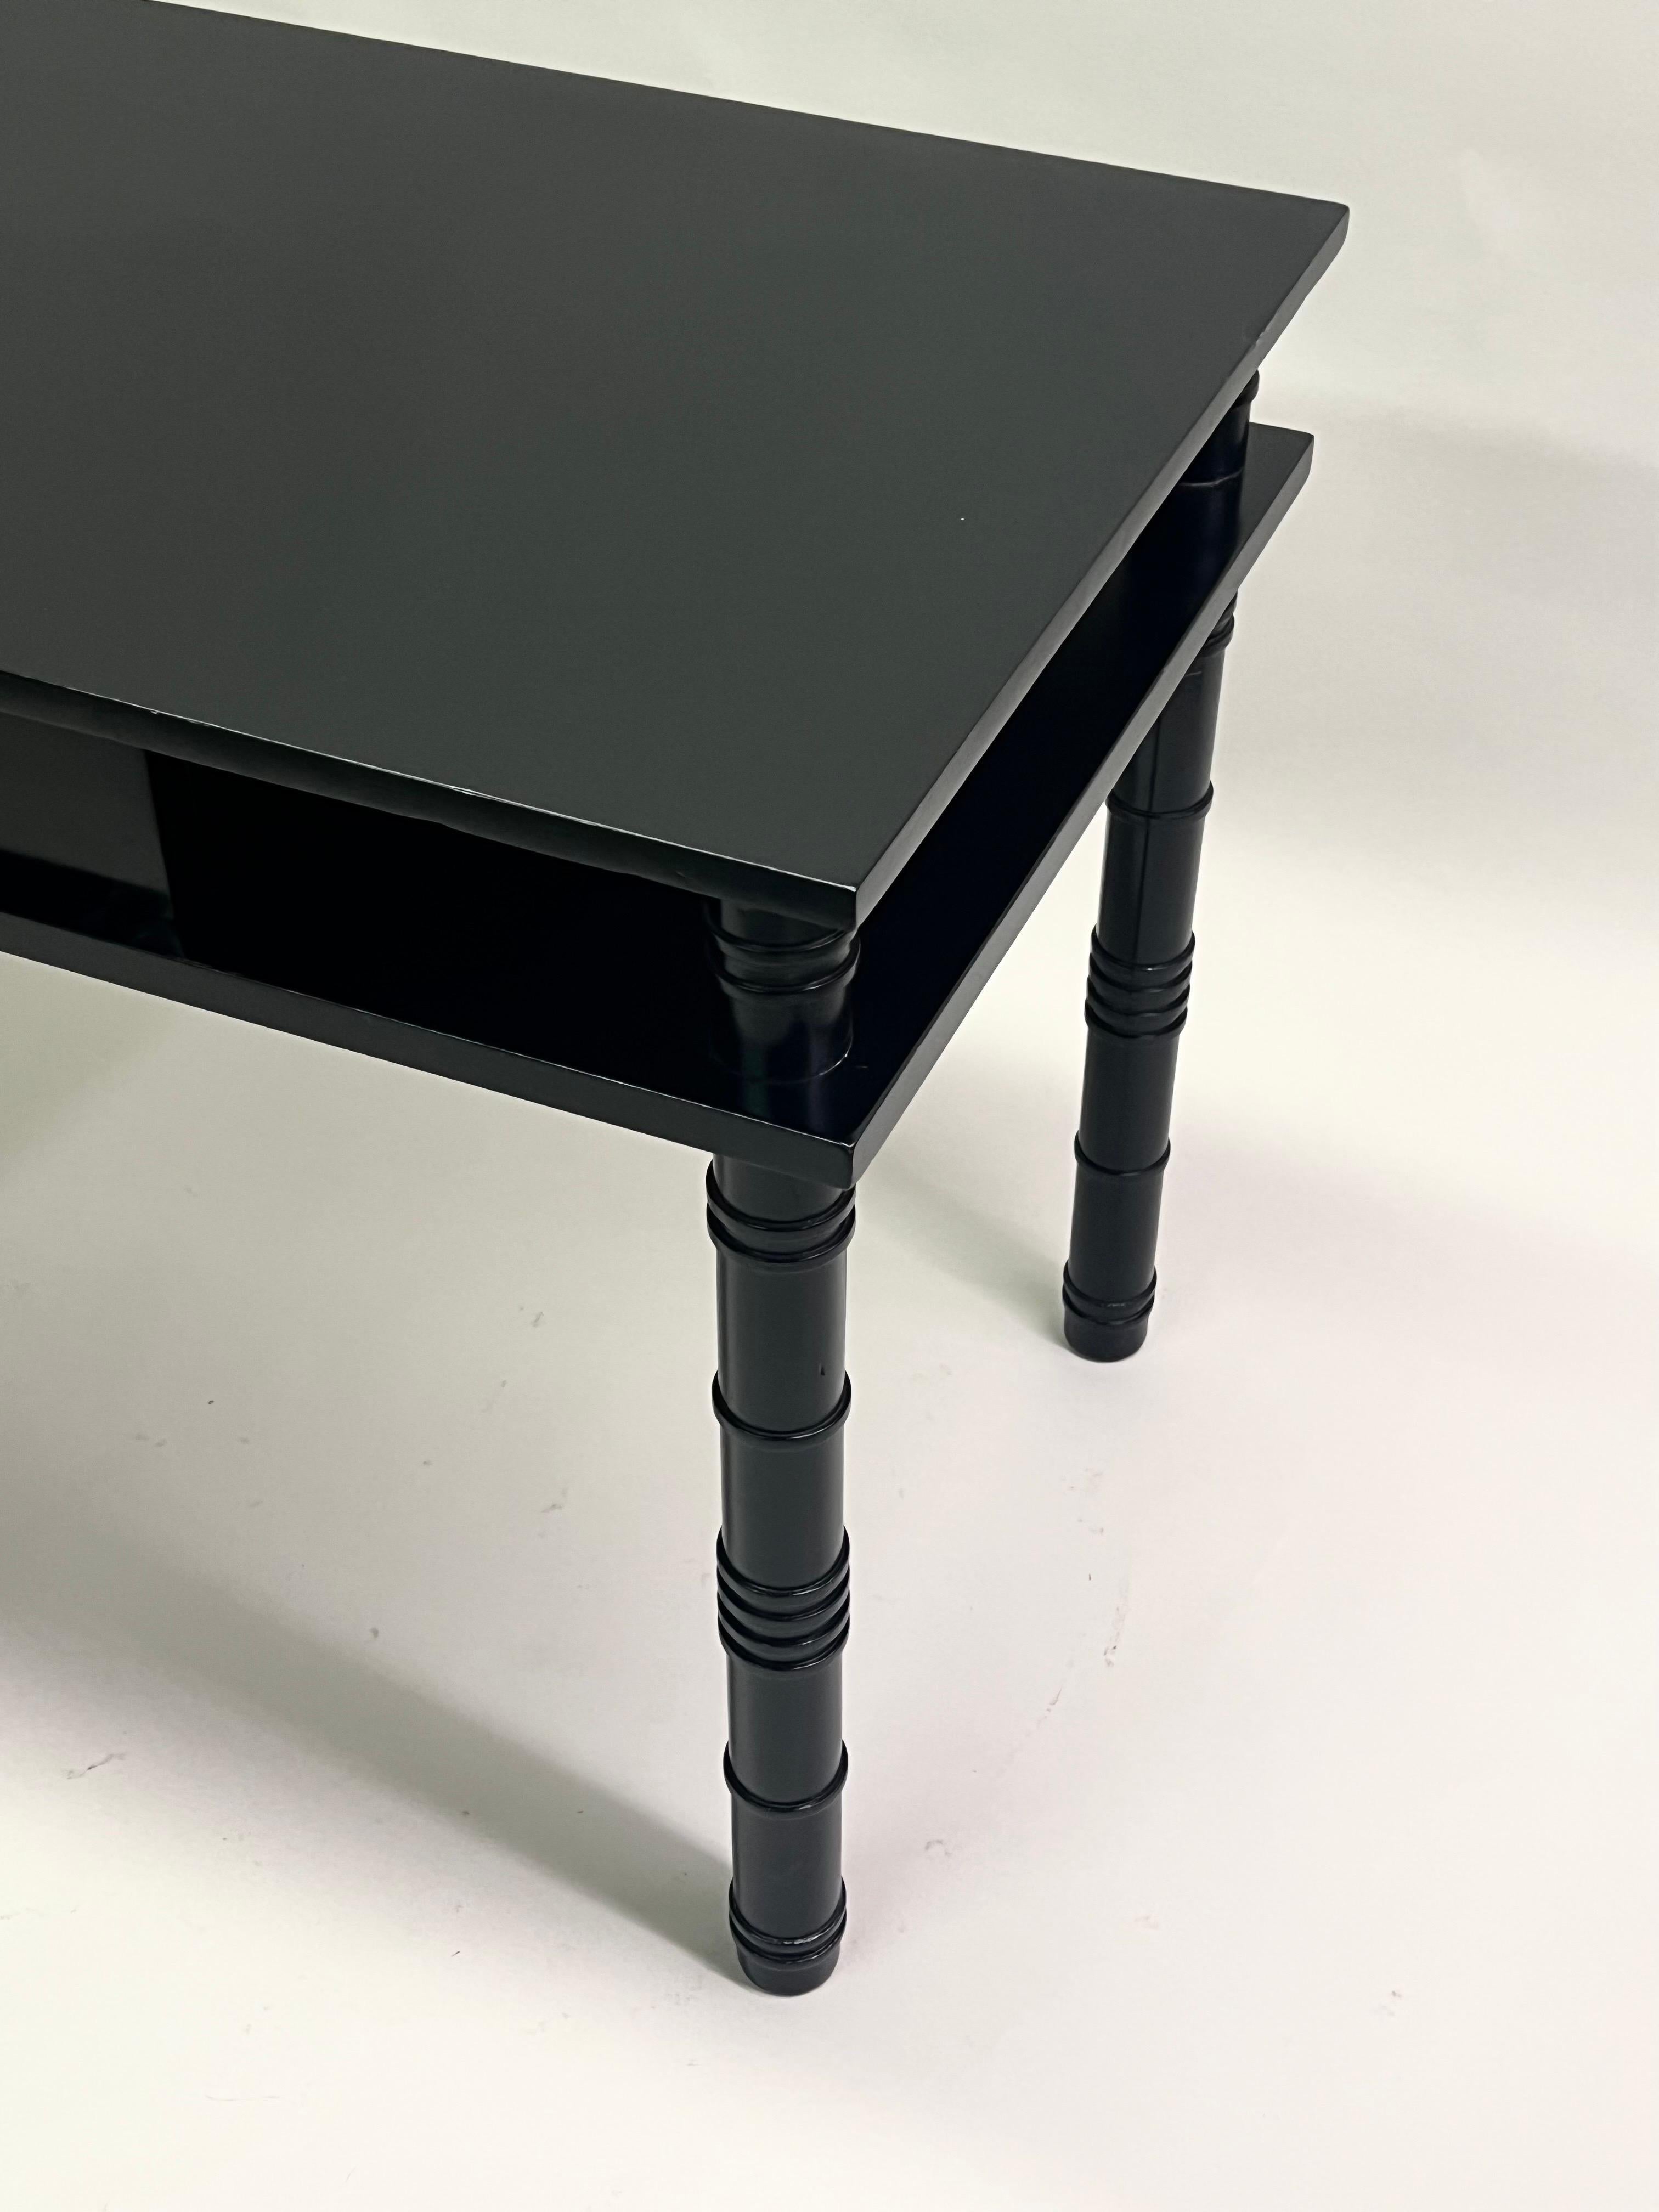 French MidCentury Modern Neoclassical Ebonized Sycamore Desk by Leon Jallot 1936 For Sale 4